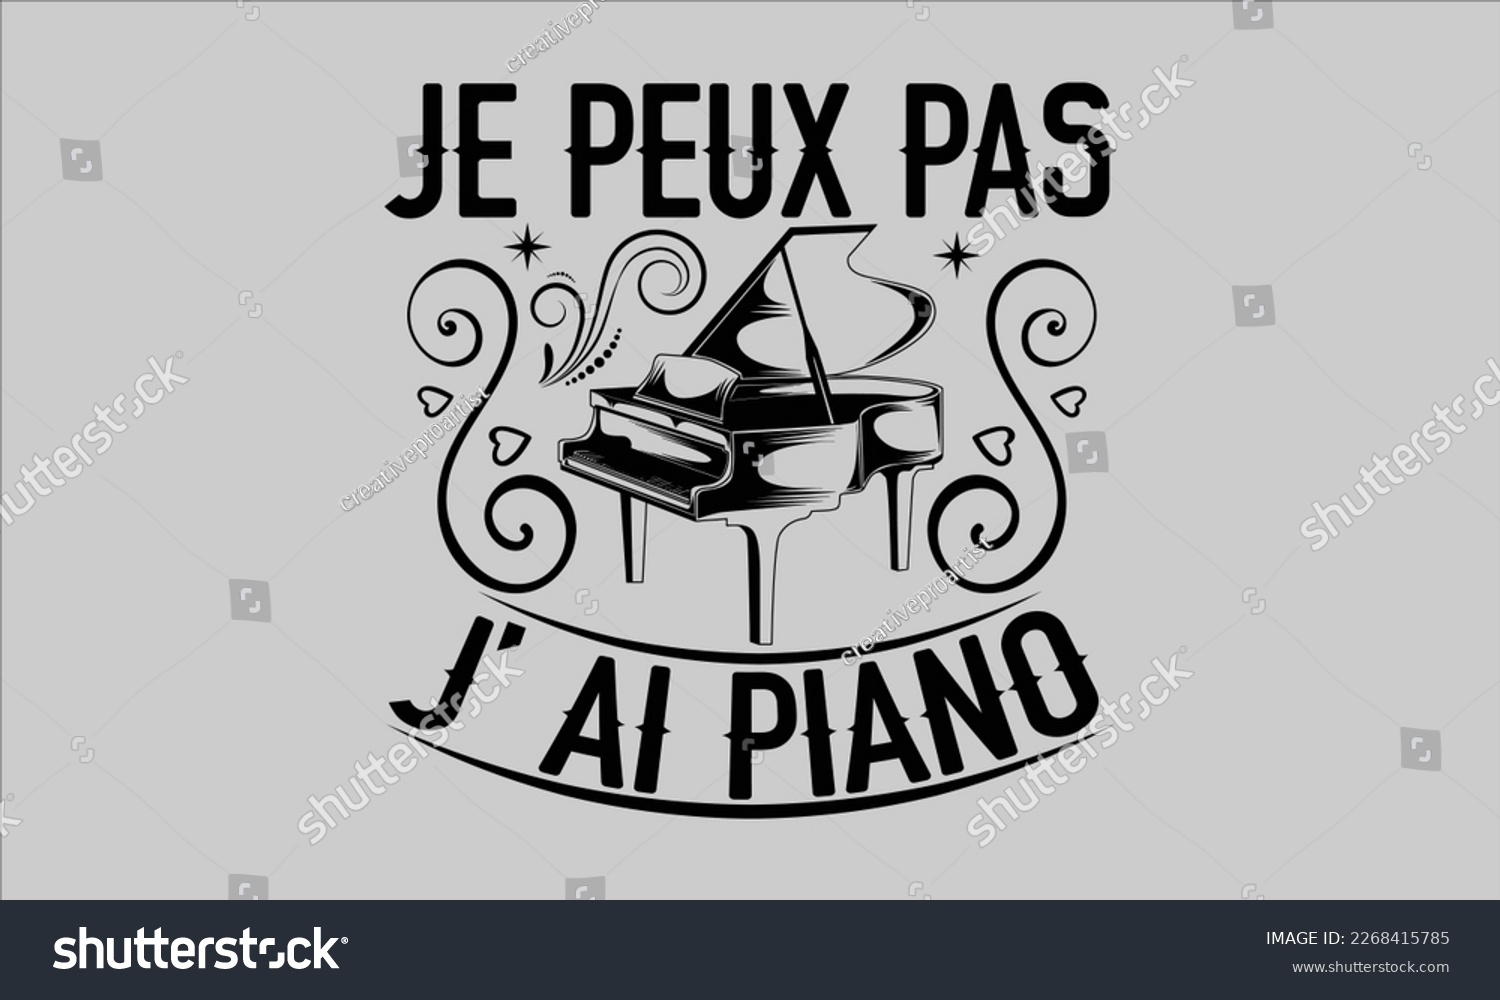 SVG of Je peux pas j’ ai piano- Piano t- shirt design, Template Vector and Sports illustration, lettering on a white background for svg Cutting Machine, posters mog, bags eps 10. svg